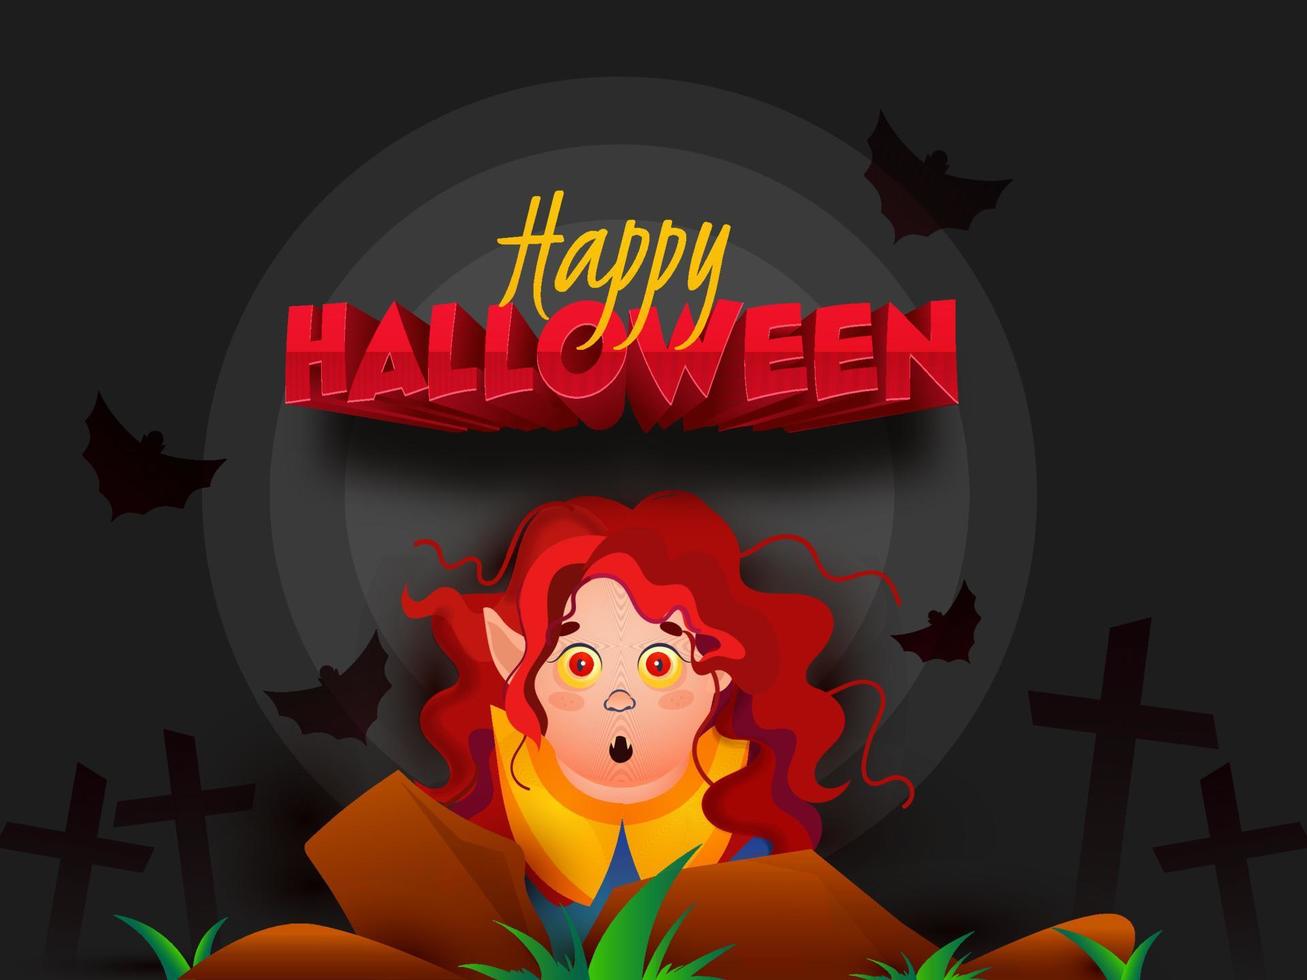 Happy Halloween Text with Cartoon Witch Character, Bats Flying and Tombstones on Dark Grey Background. vector